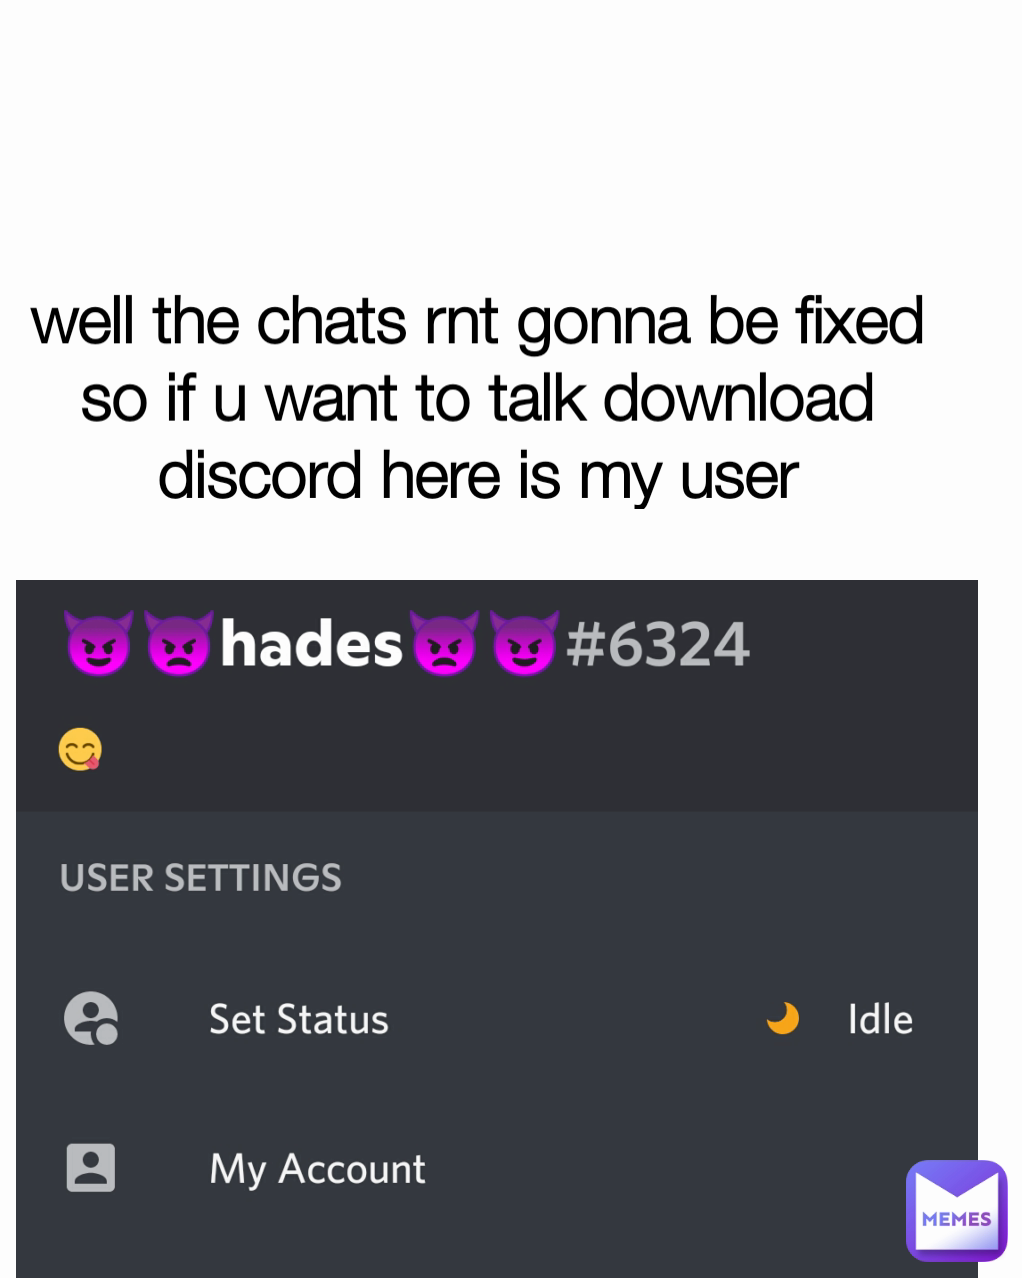 well the chats rnt gonna be fixed so if u want to talk download discord here is my user